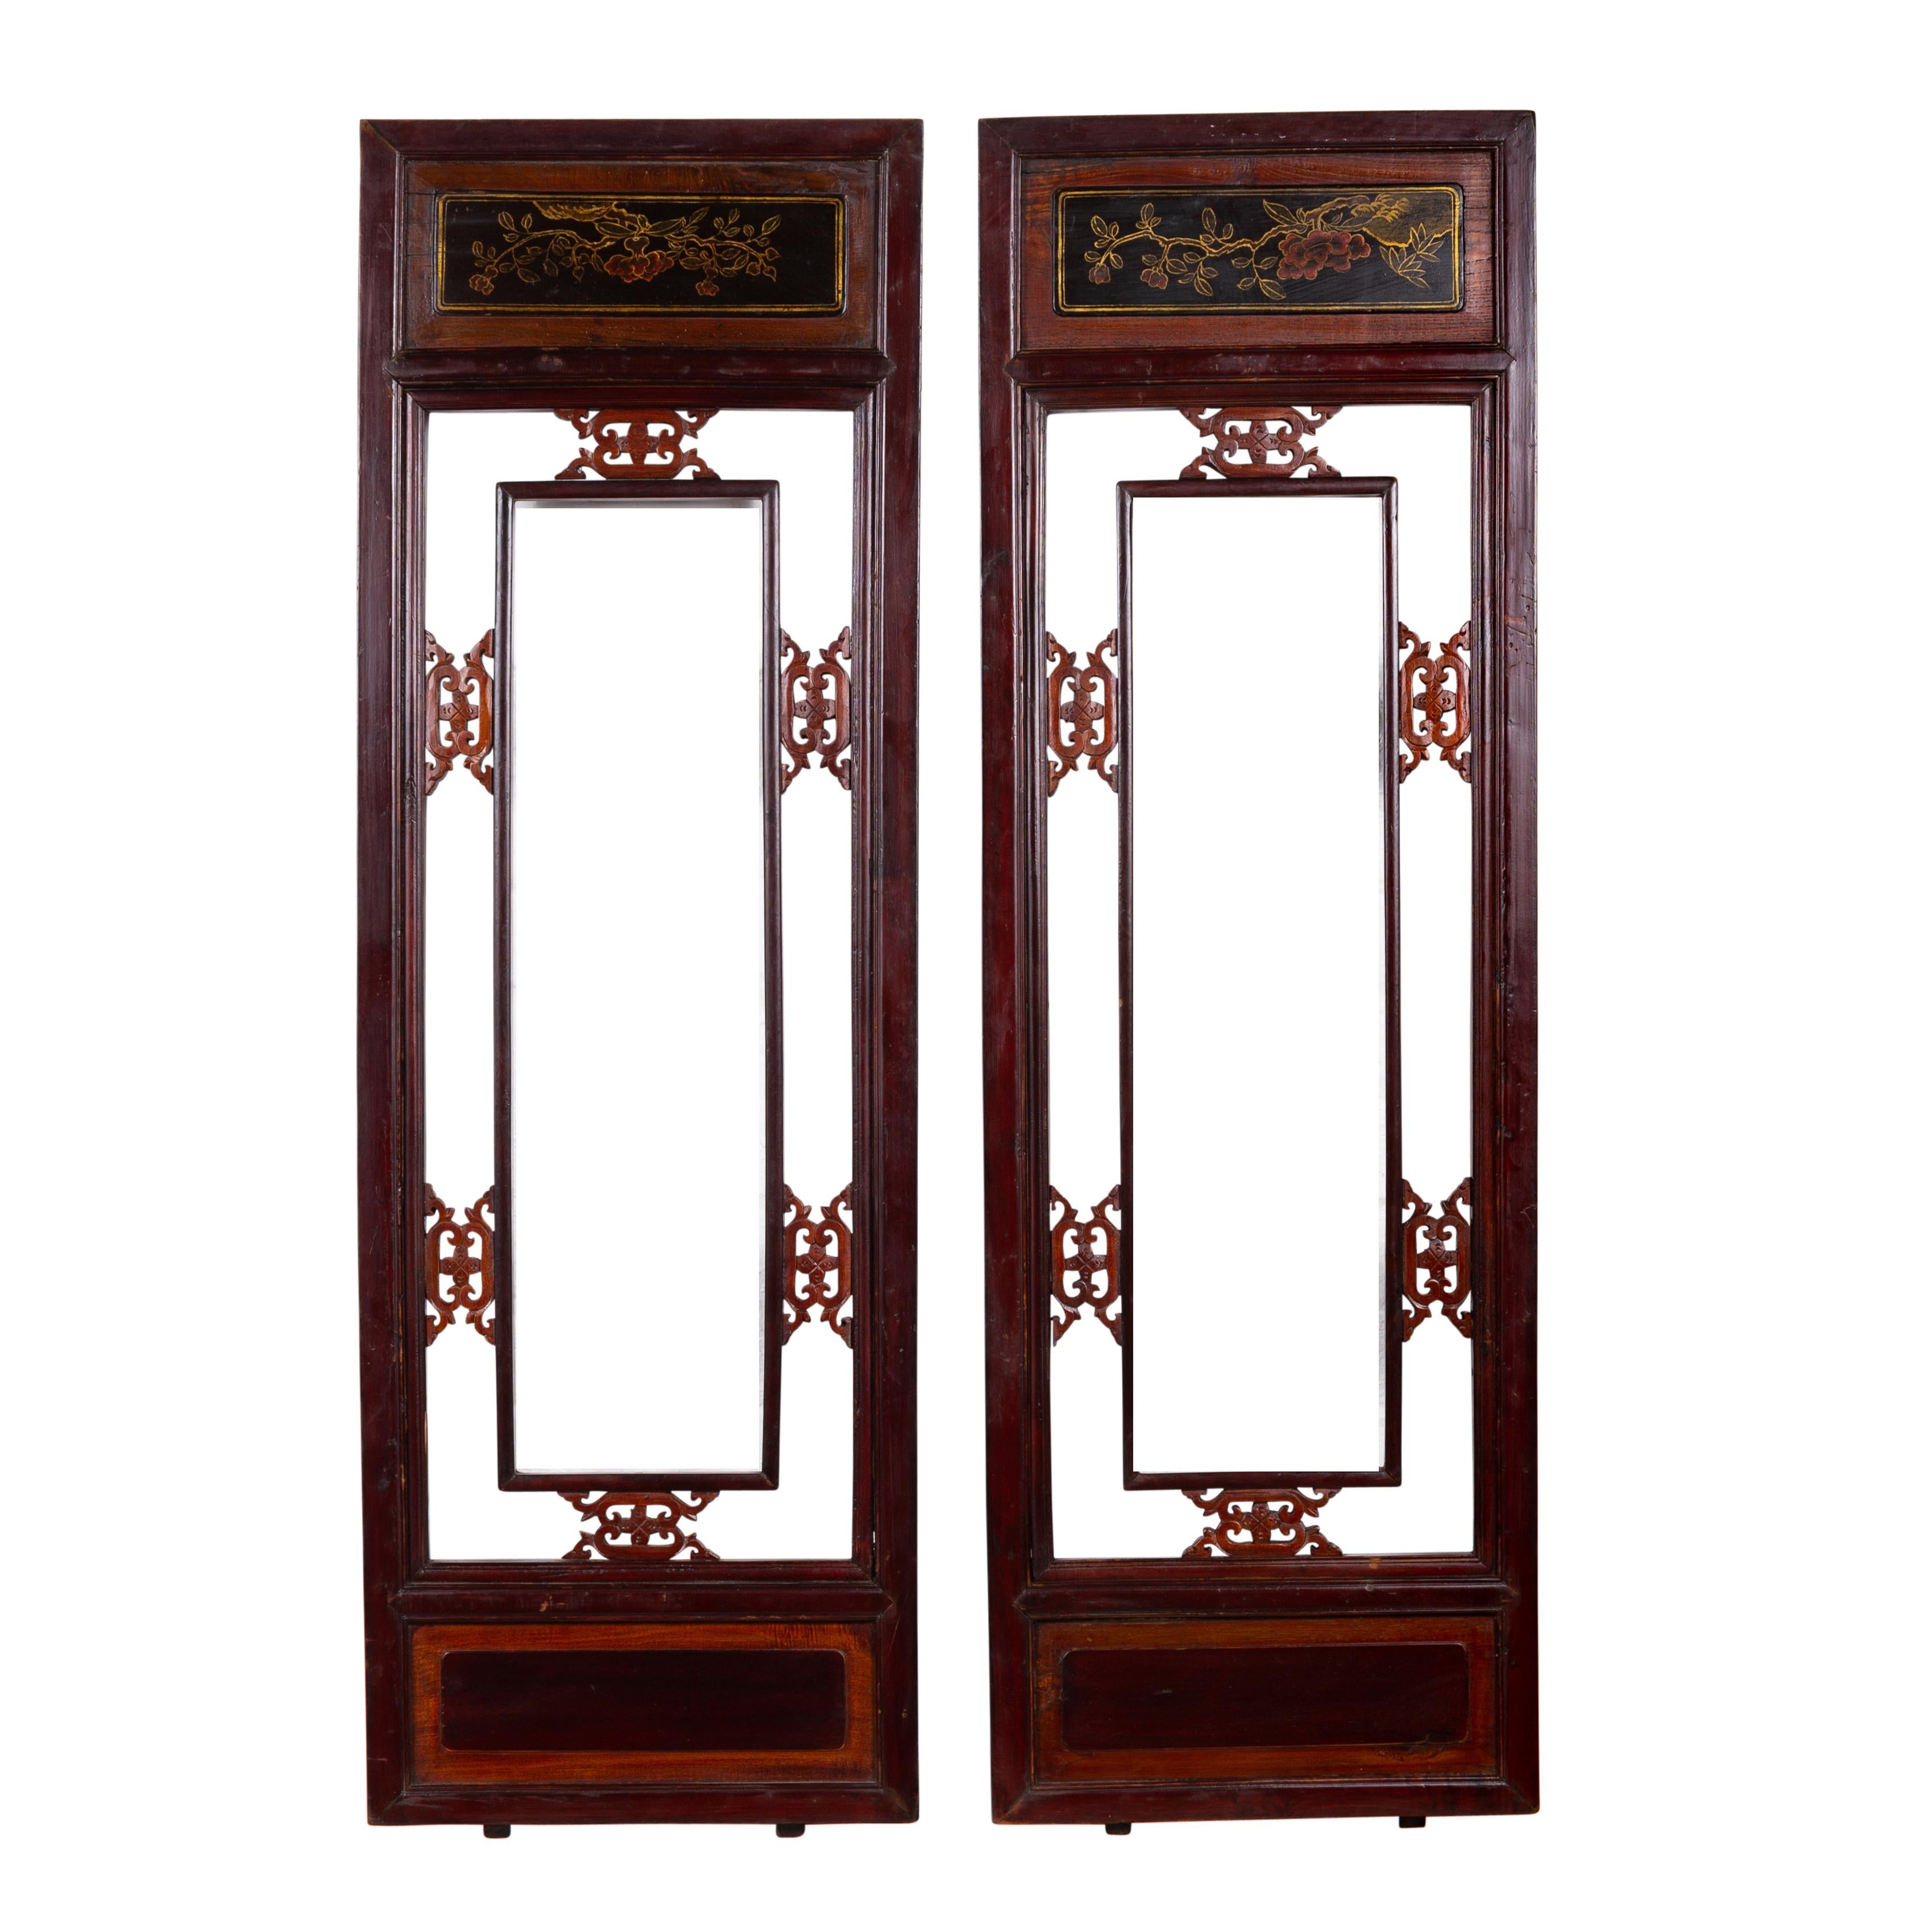 Pair of Chinese Antique Carved Wooden Panels with Red, Brown and Golden Accents